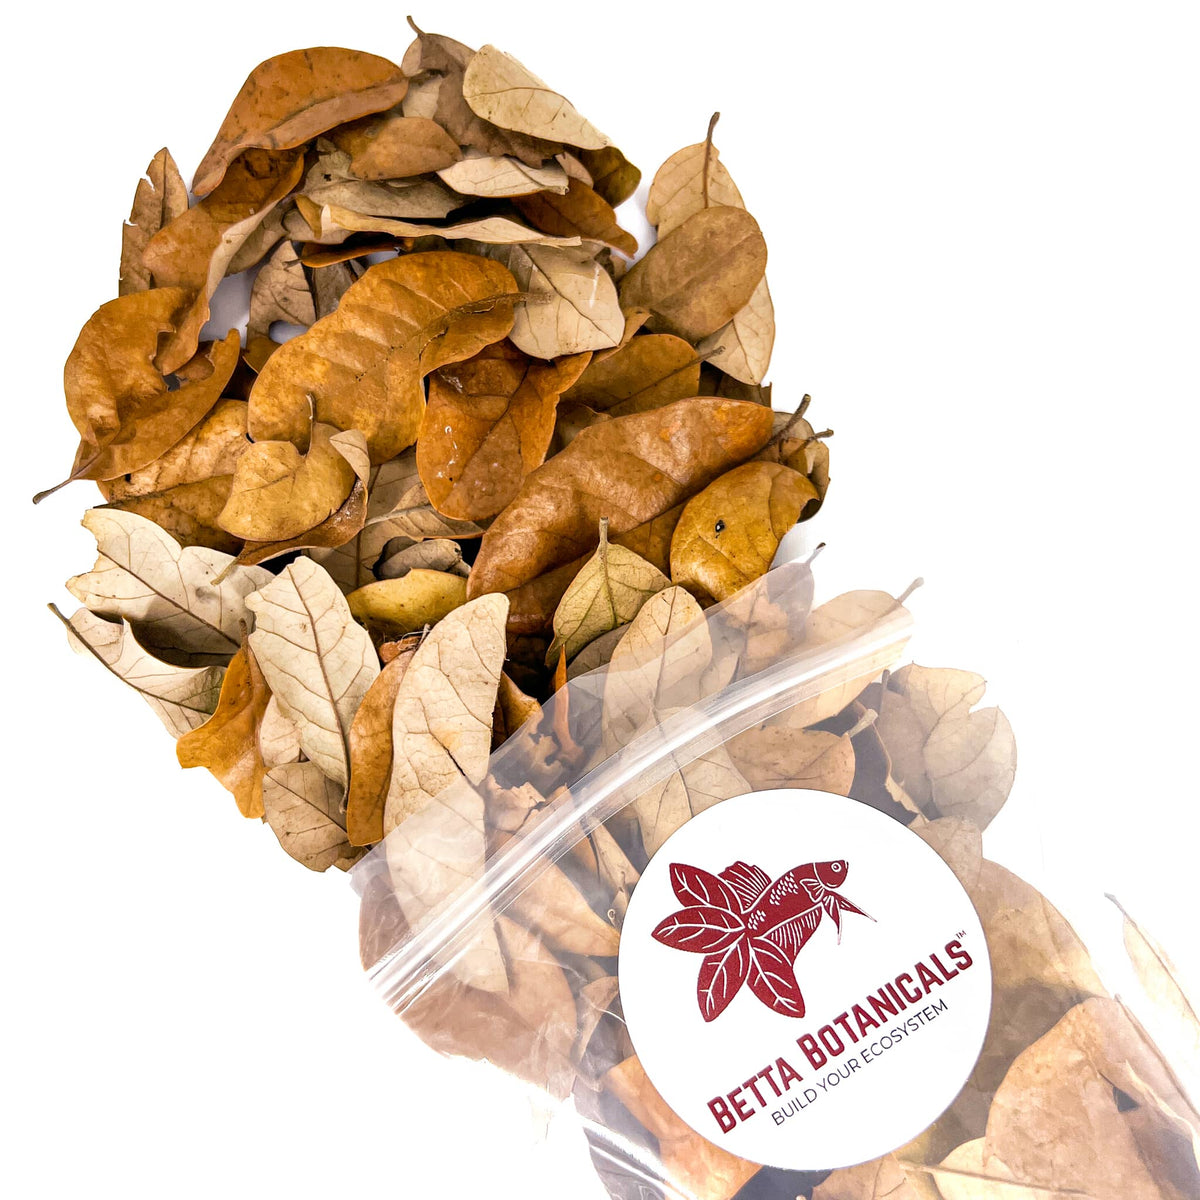 Brown and tan texas live oak leaf litter in clear sustainable packaging by Betta Botanicals, for aquariums and bioactive enclosures.